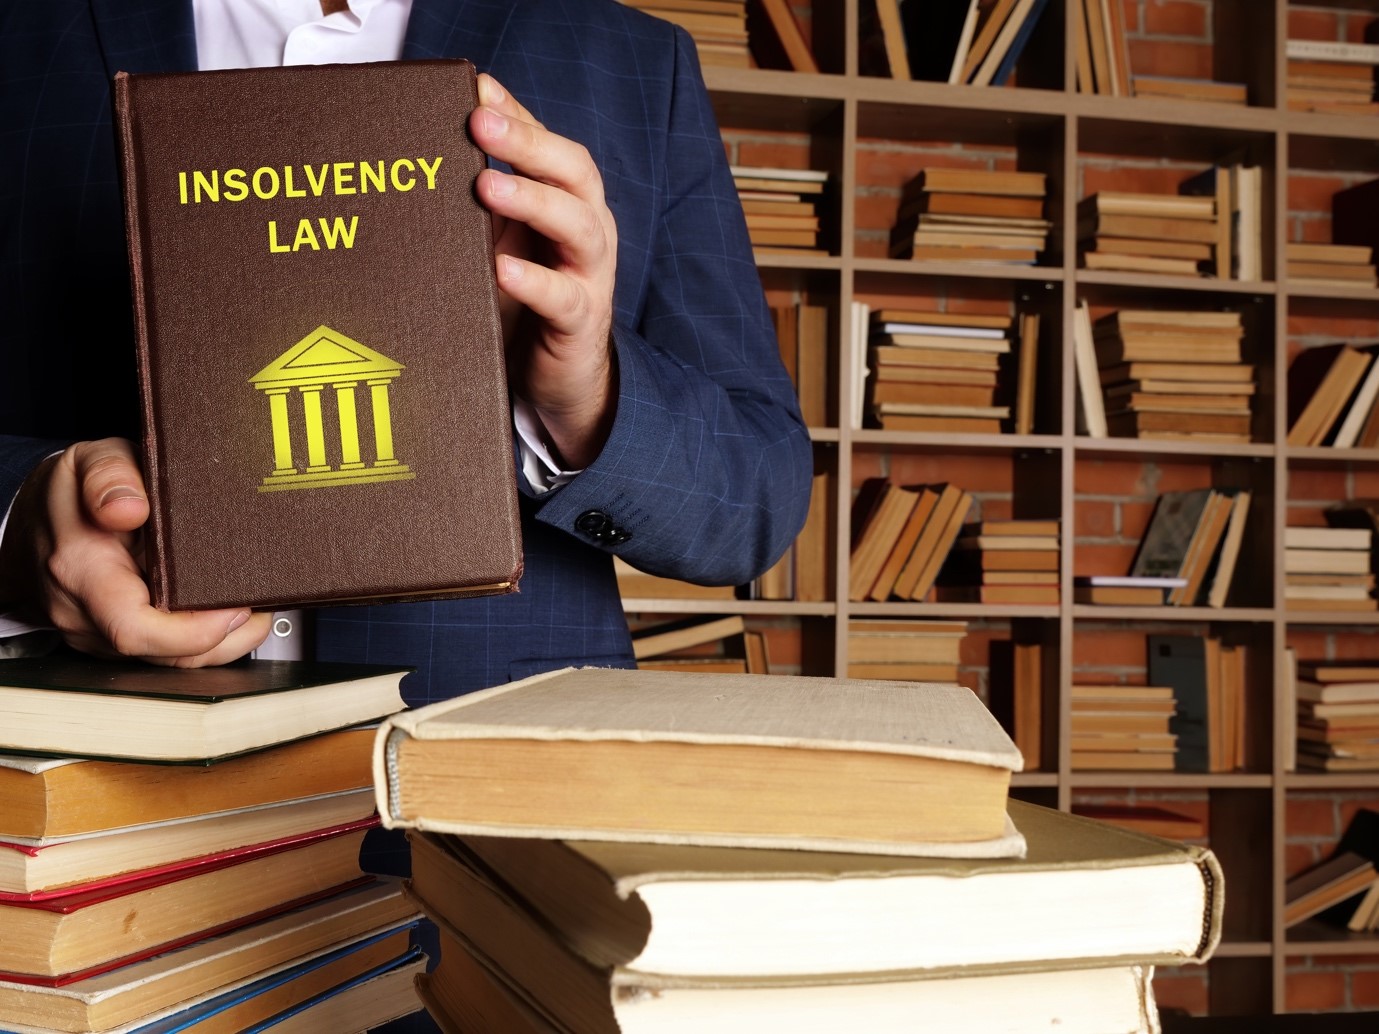 Insolvency Professionals | TRC Corporate Consulting